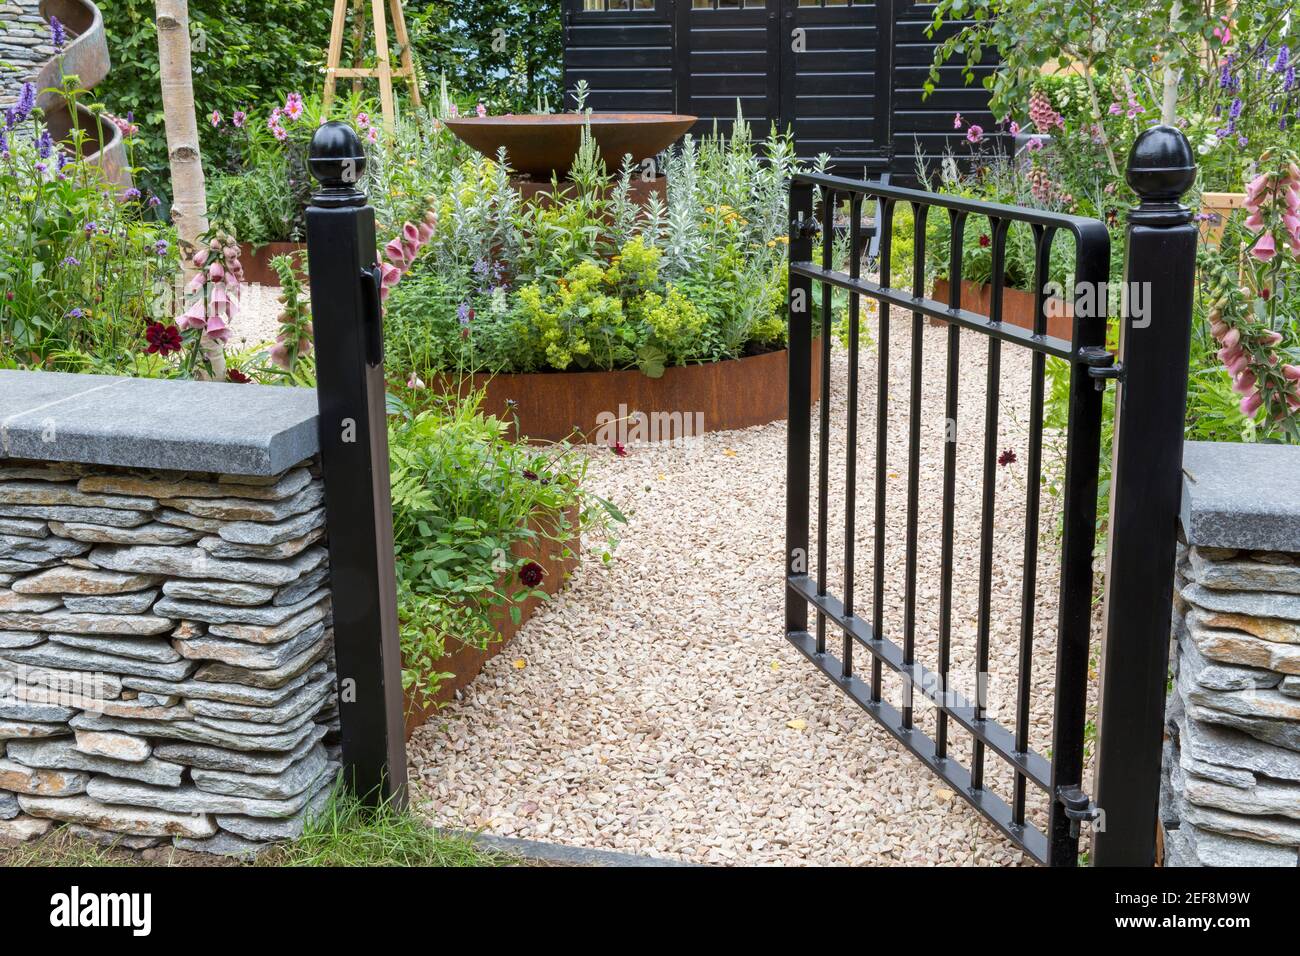 English country cottage garden A painted black metal garden gate with dry stone wall view of gravel path and flower beds borders England UK Stock Photo